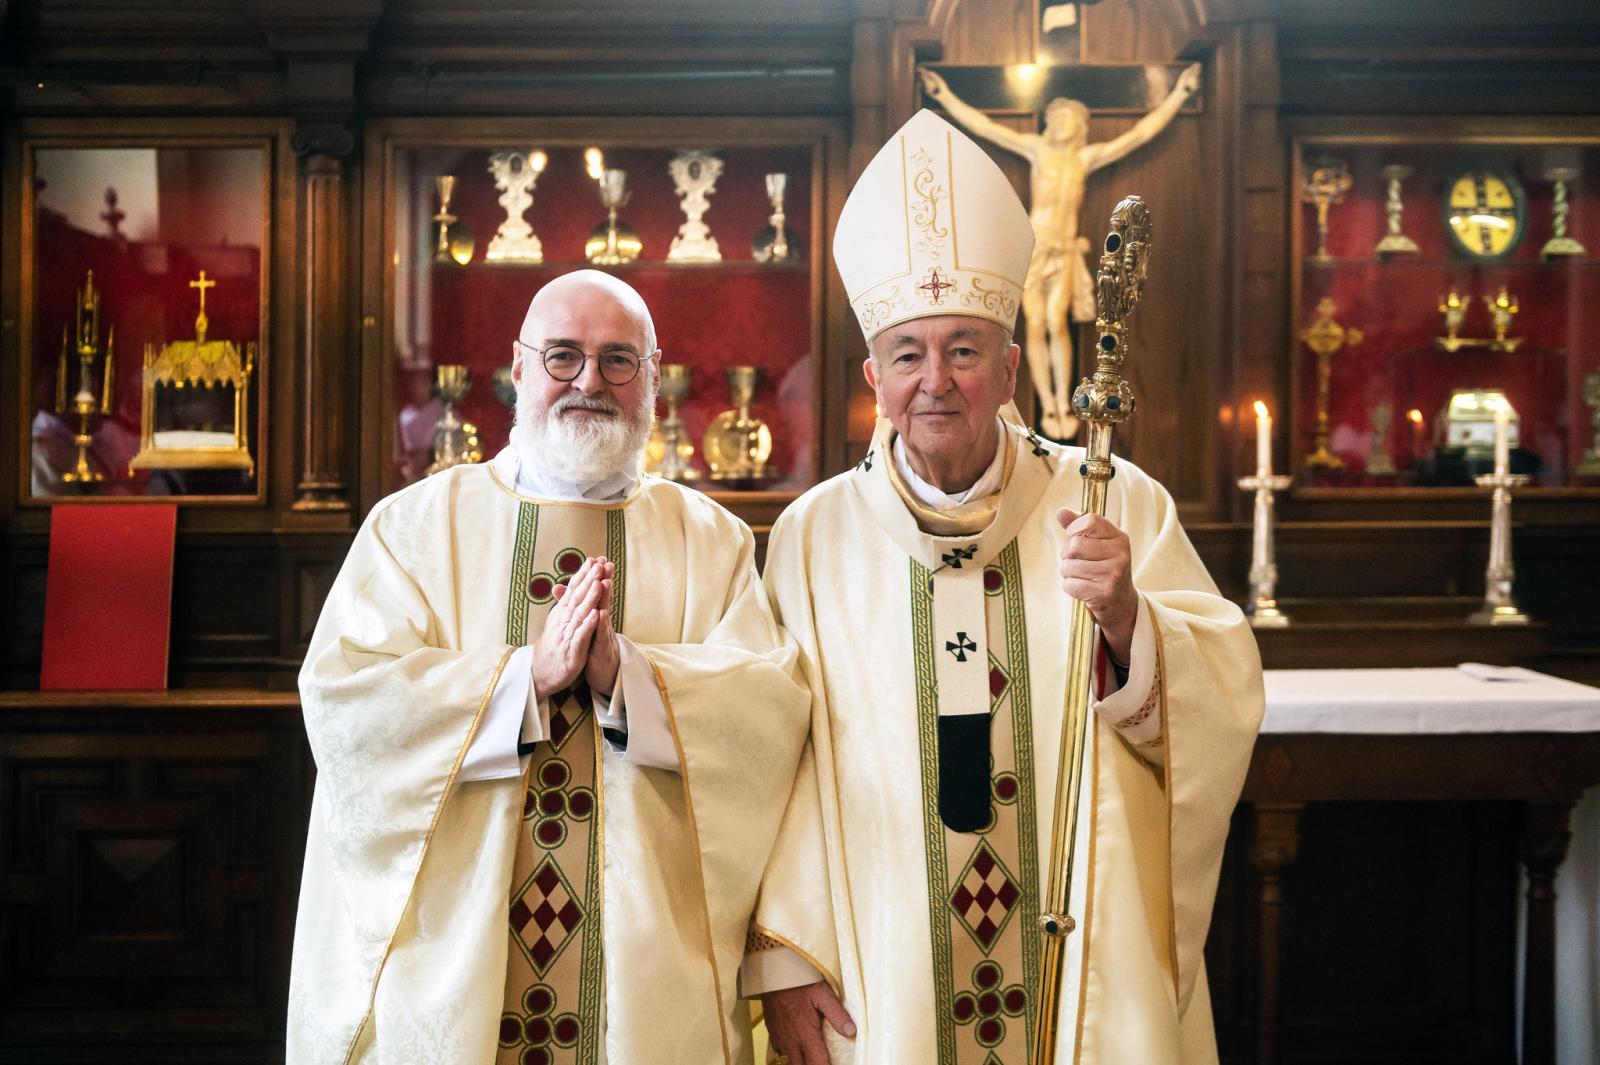 Cardinal ordains Jonathan Goodall to the priesthood - Diocese of Westminster